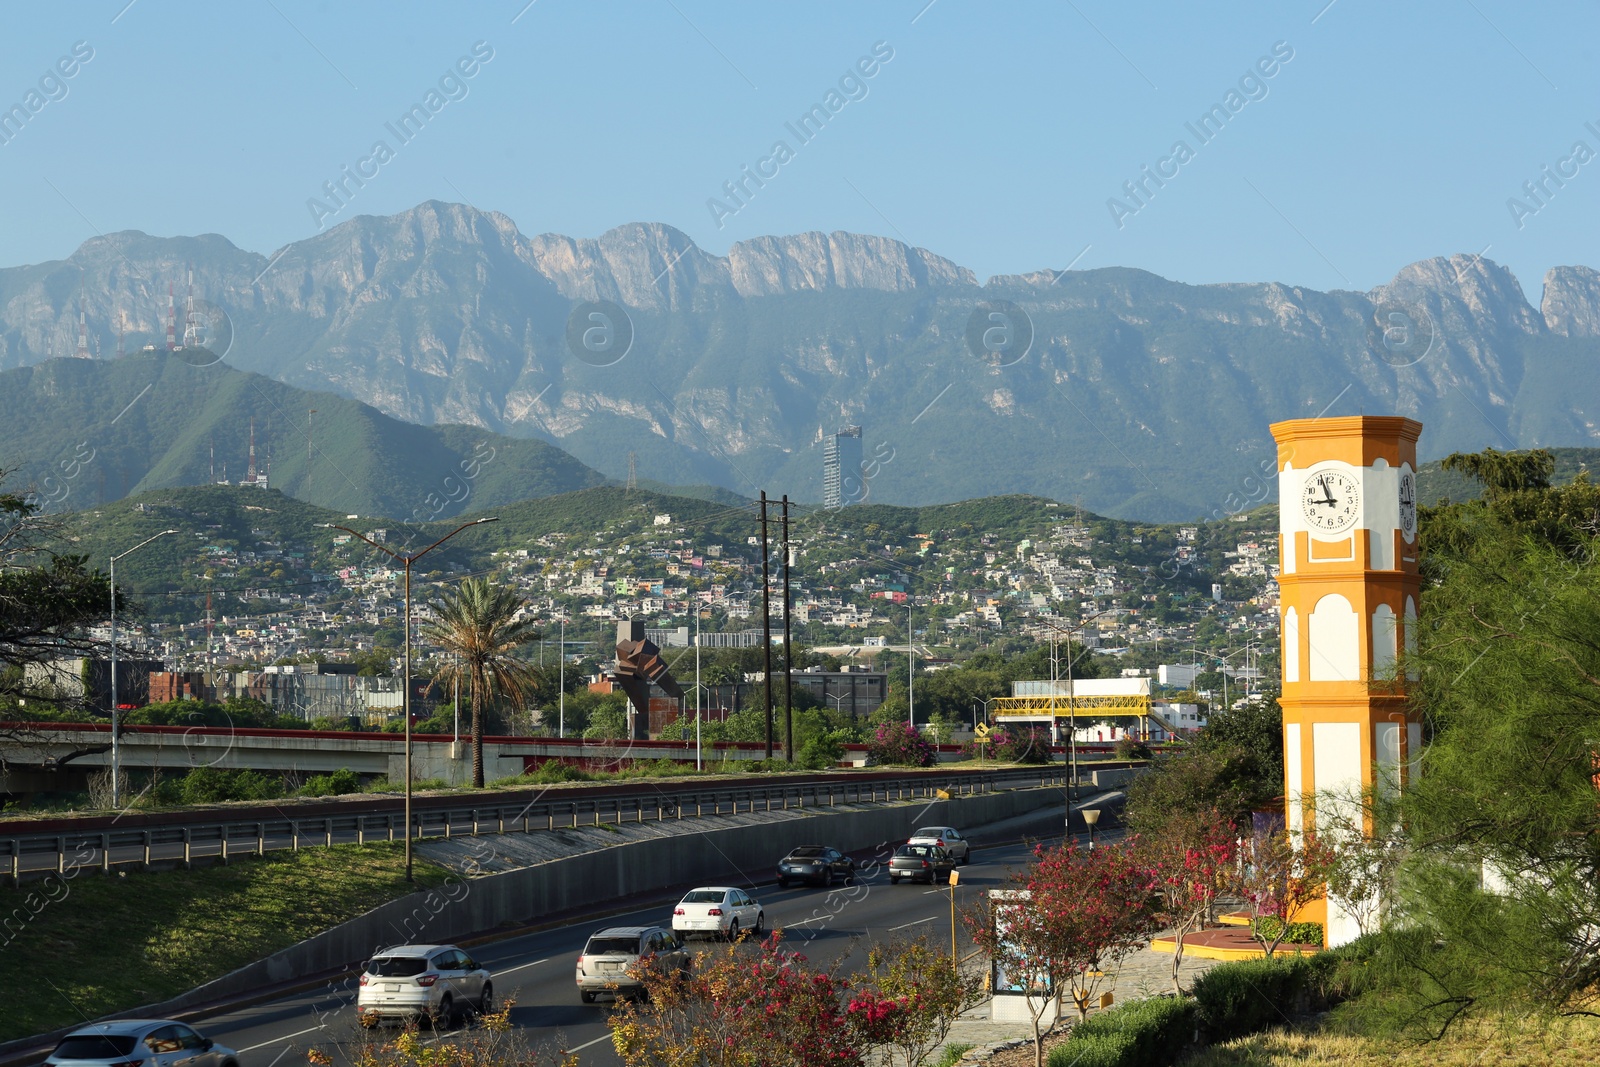 Photo of Picturesque view of city and highway in mountains